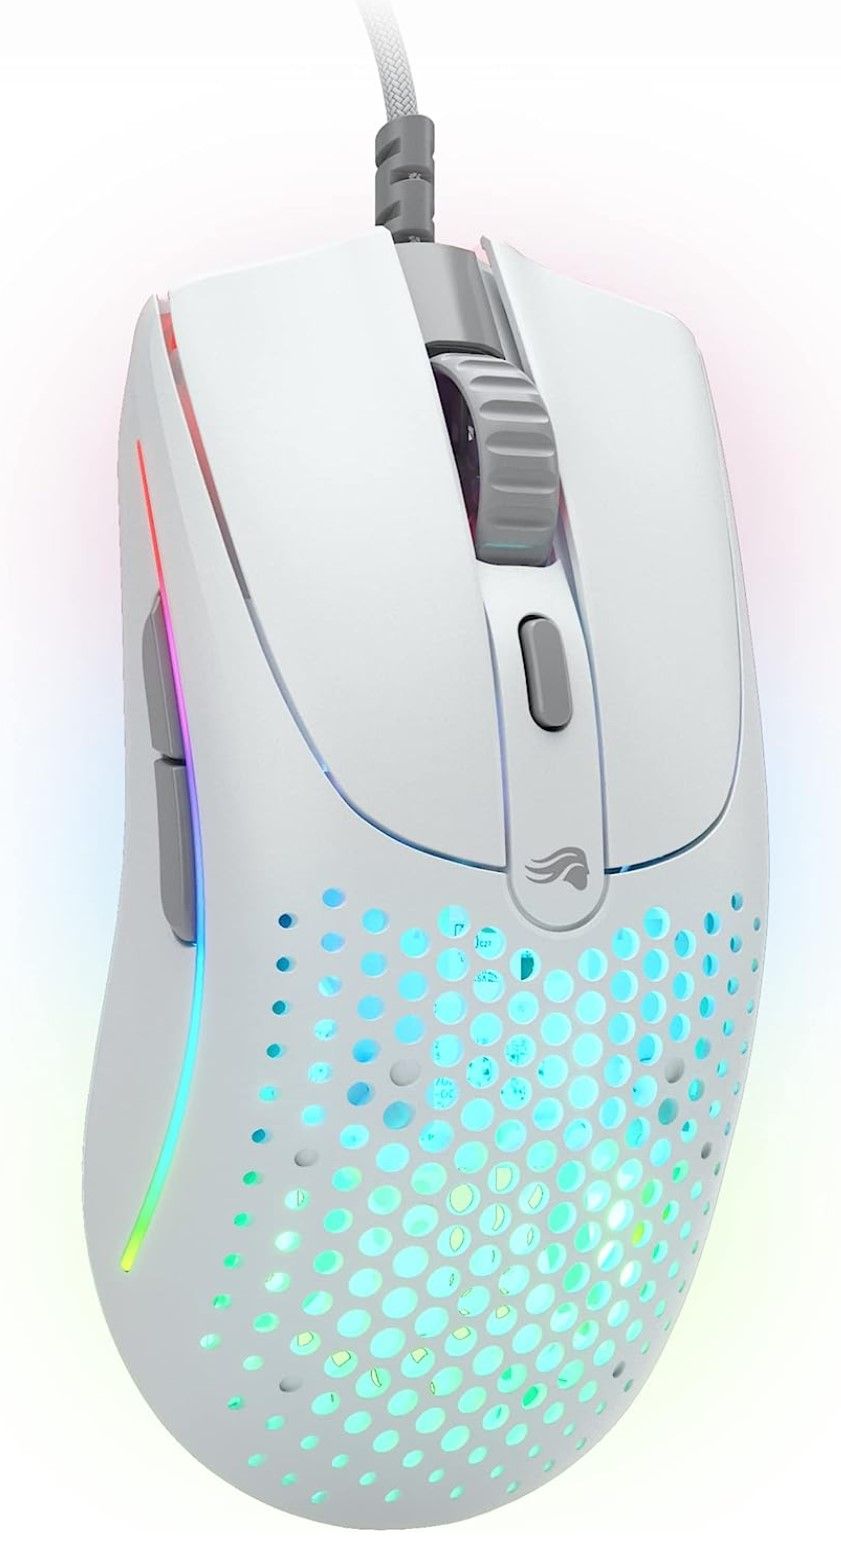 Glorious Model O 2 Wired Gaming Mouse